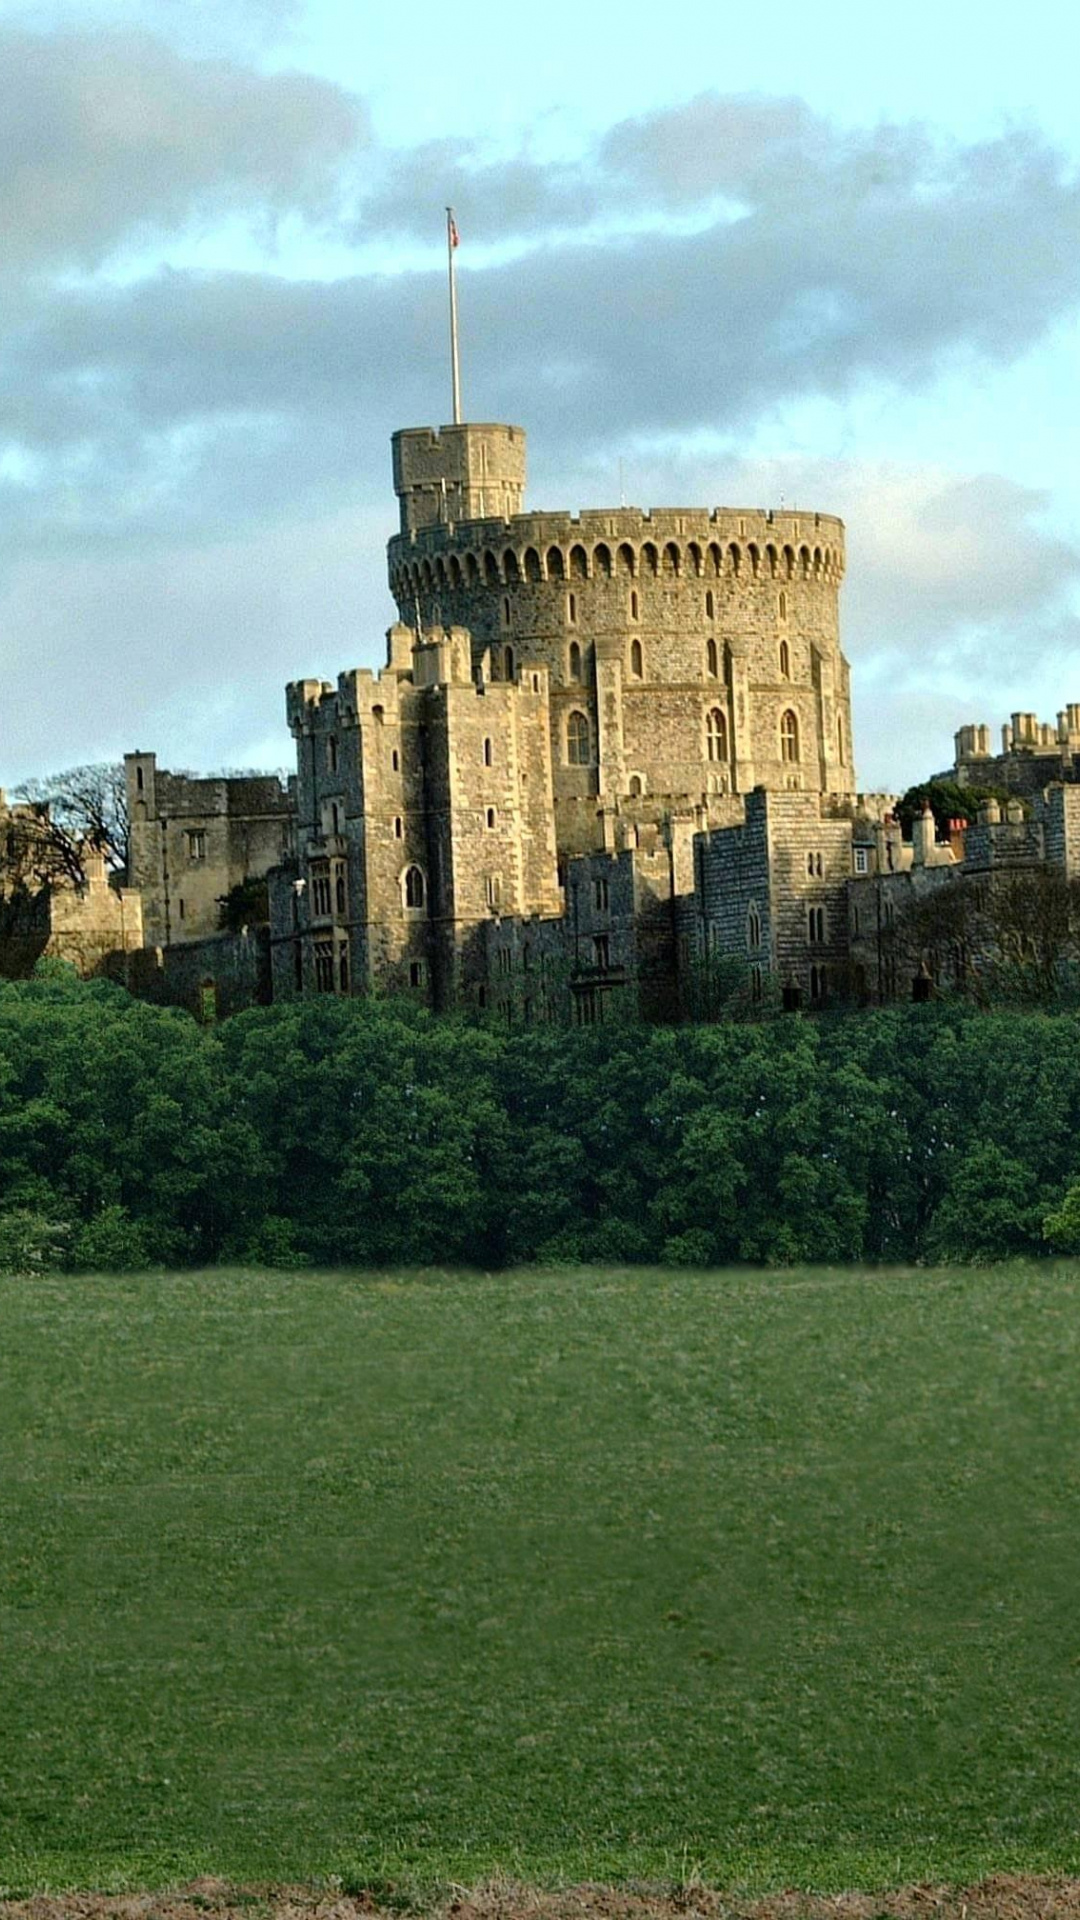 Medieval background, Castle images, Knight artwork, Historical ambiance, 1080x1920 Full HD Phone